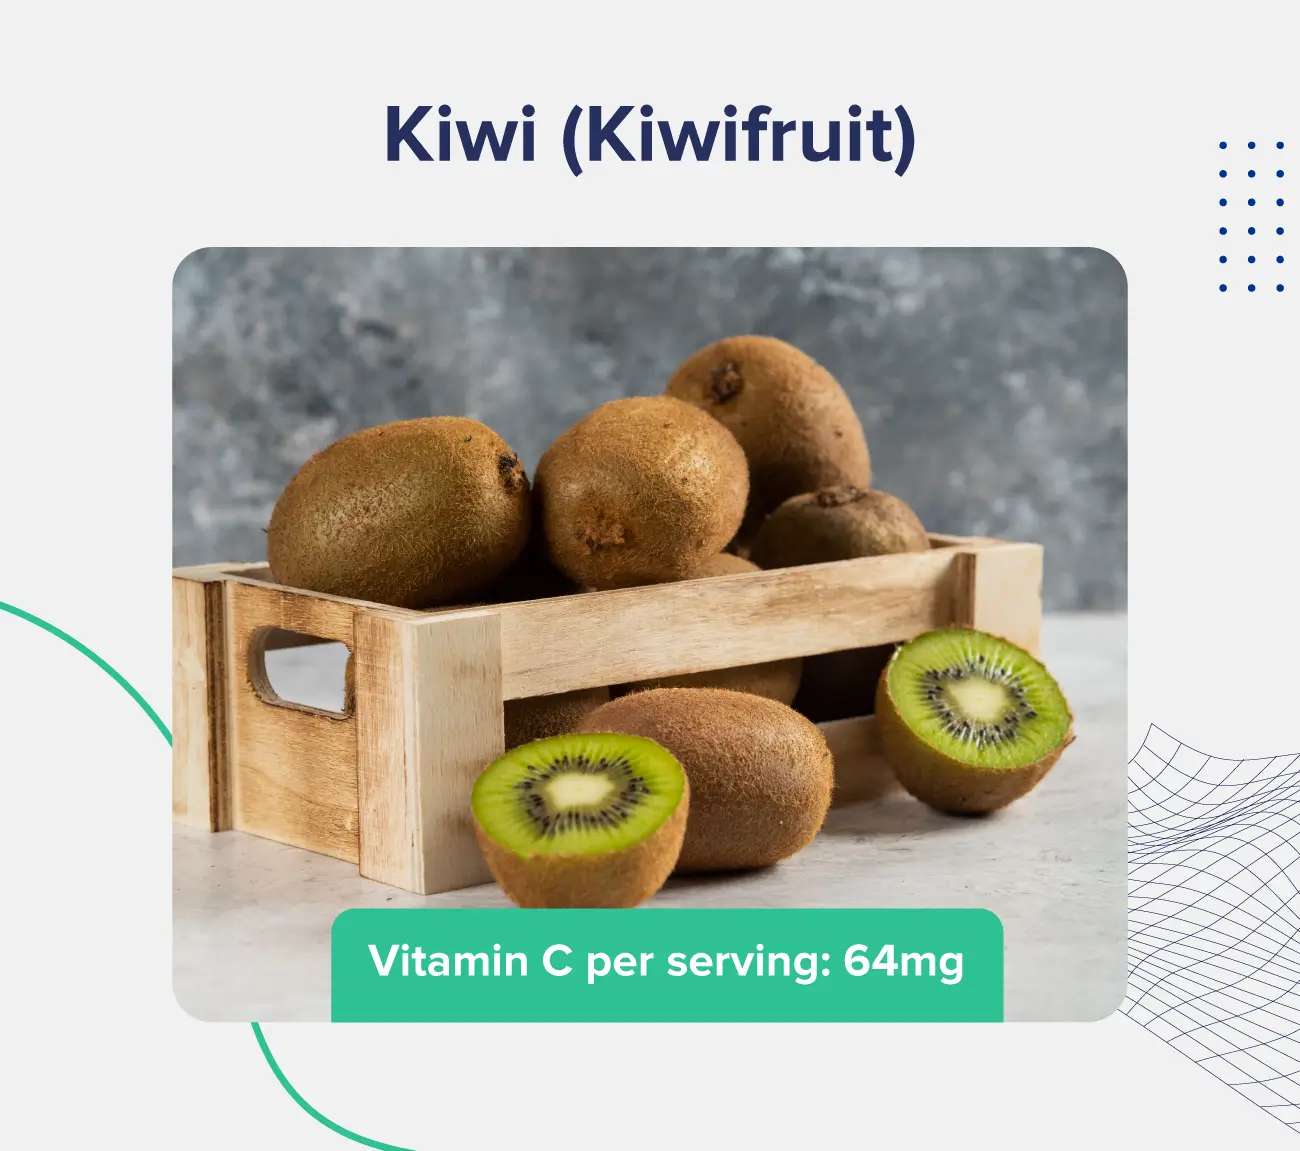 A graphic entitled "Kiwi (kiwifruit)" depicting a small crate of whole and sliced kiwis and listing the vitamin C content (64 milligrams per serving) 